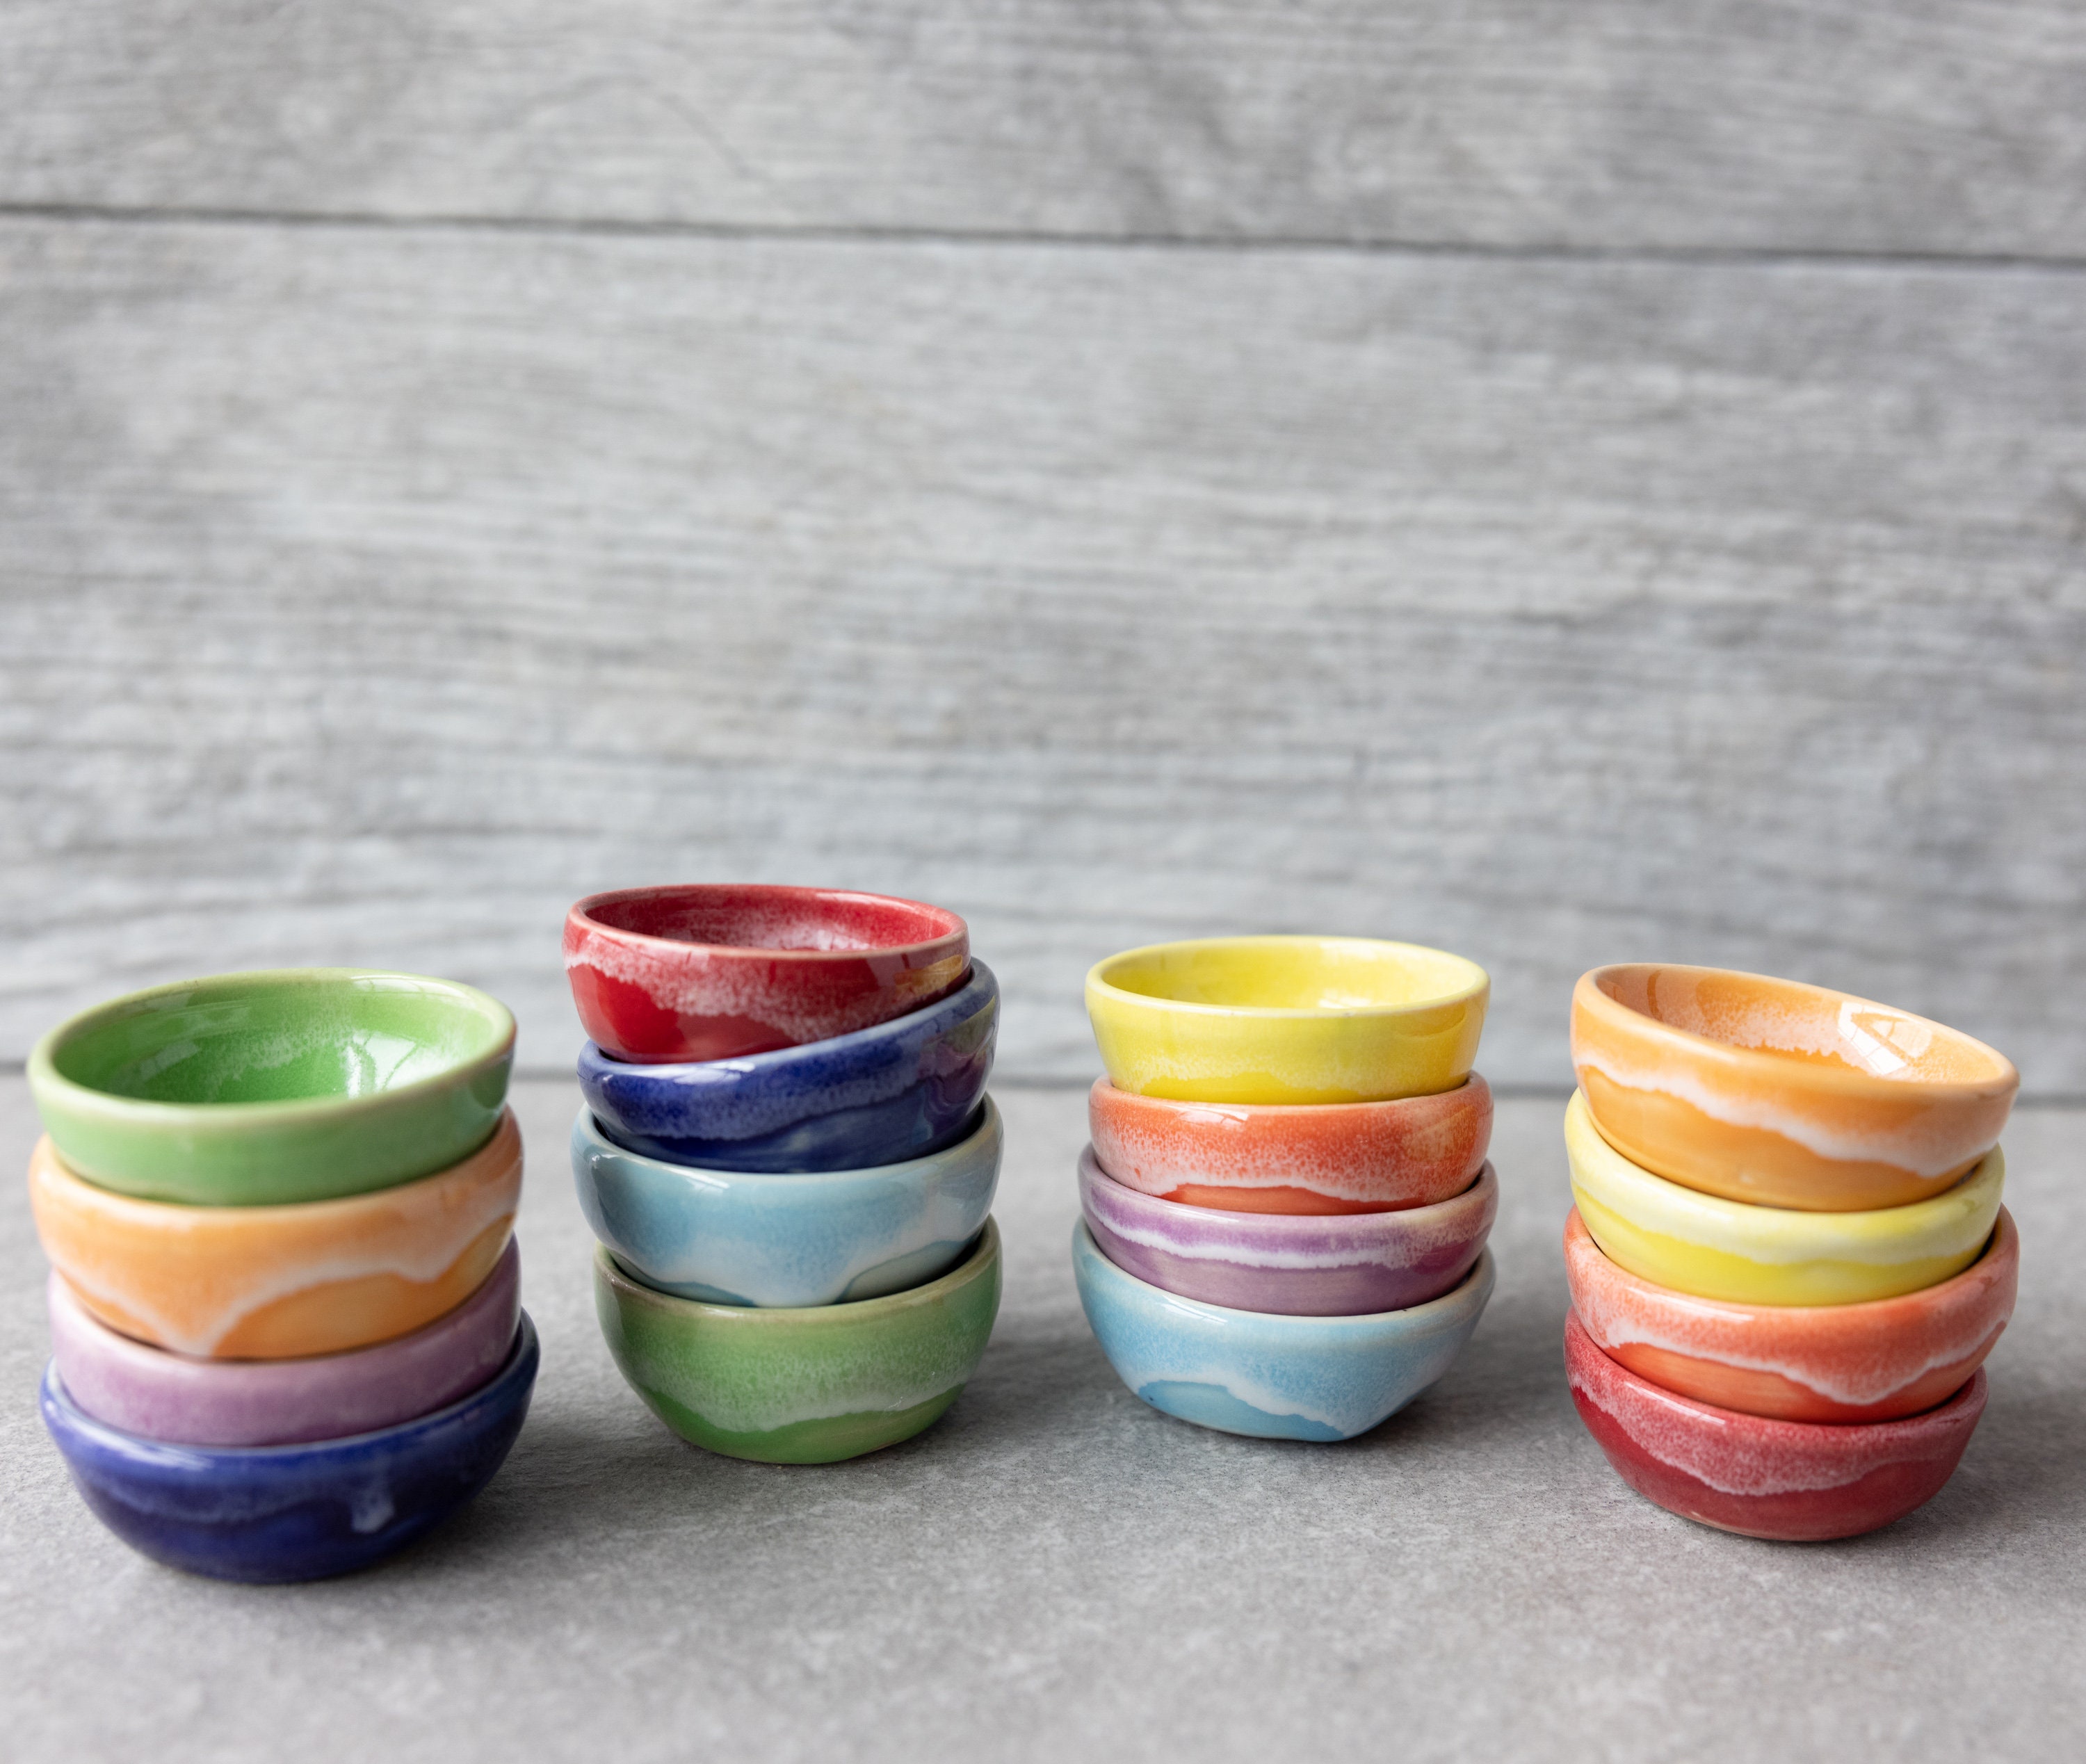 Ceramic Pinch Bowls Set of 6, Small Bowls for Dipping - Cooking Prep & Charcuterie Board Bowls, Soy Sauce Dish, Multicolor Handmade Decorative Serving